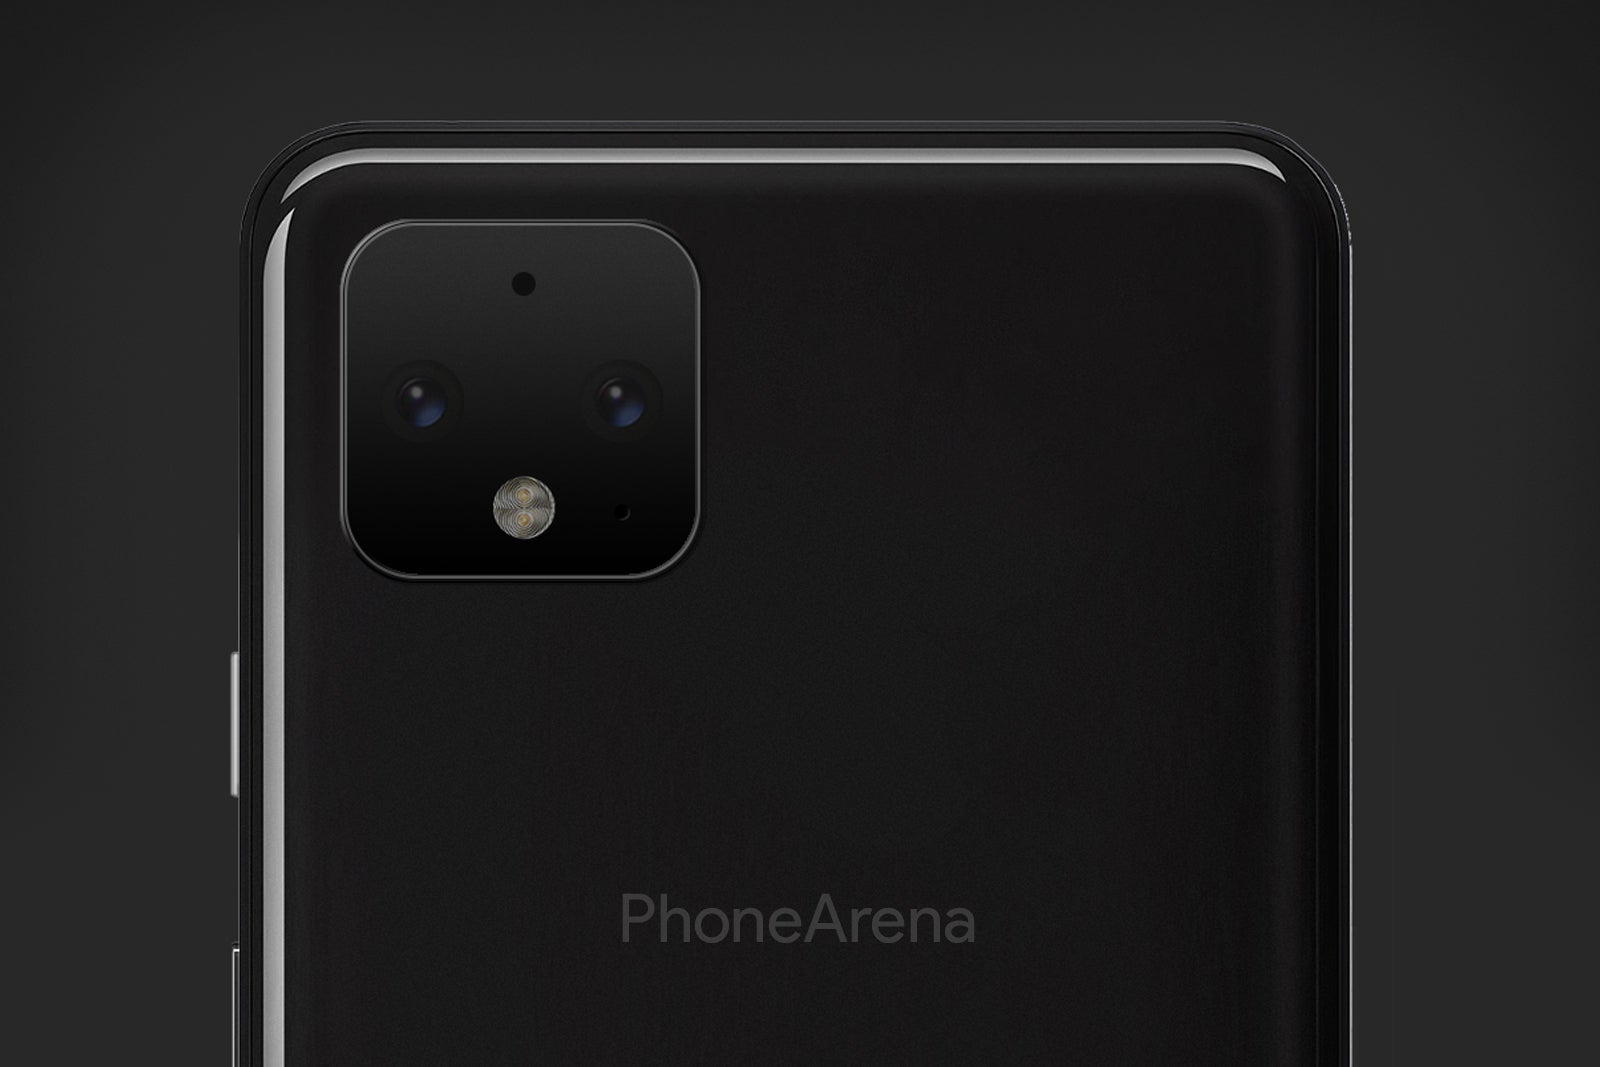 Google Pixel 4 and Pixel 4 XL rumor review: Design, specs, camera, price and release date